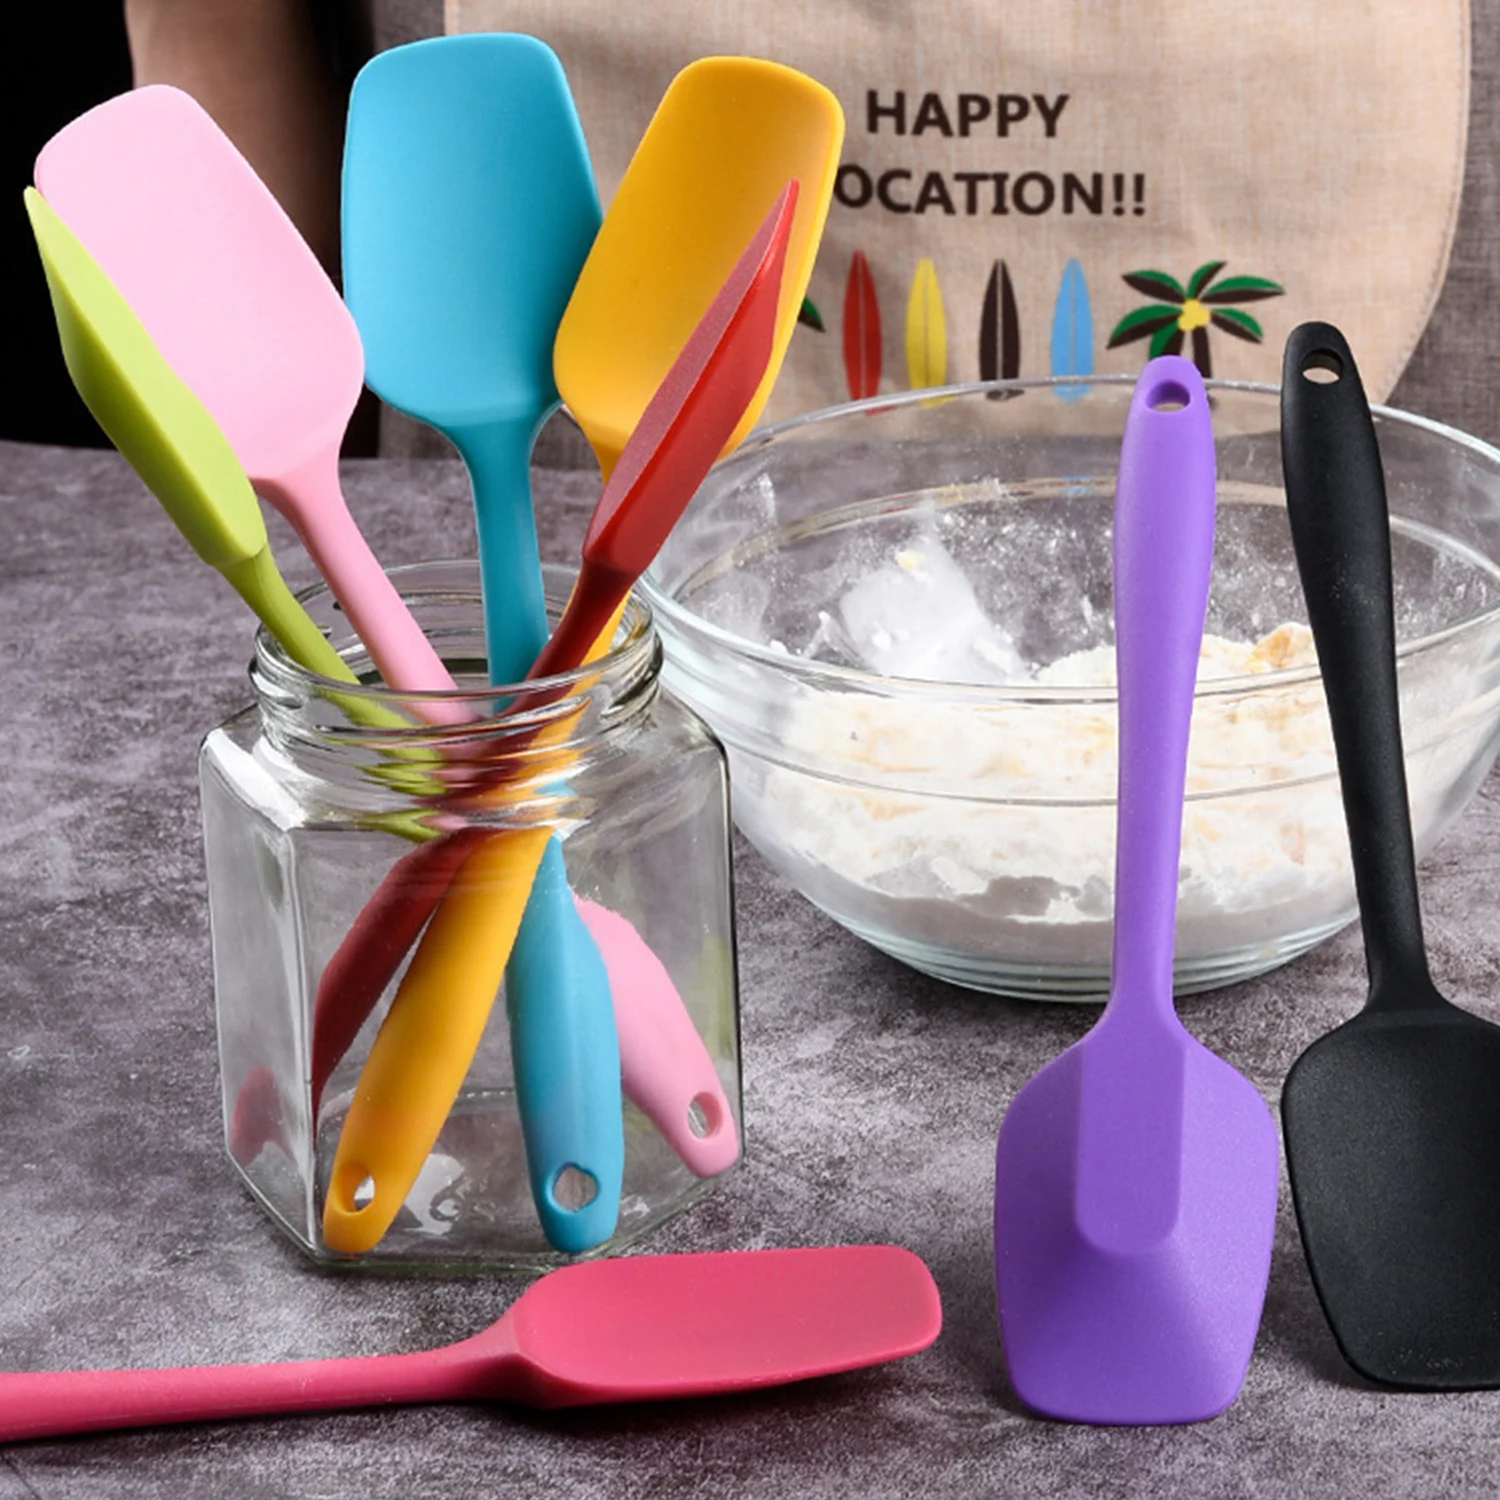 

1Pcs Cream Baking Scraper Non-stick Silicone Spatula Kitchen Pastry Blenders Salad Cake Mixer Butter Batter Pies Cooking Tools